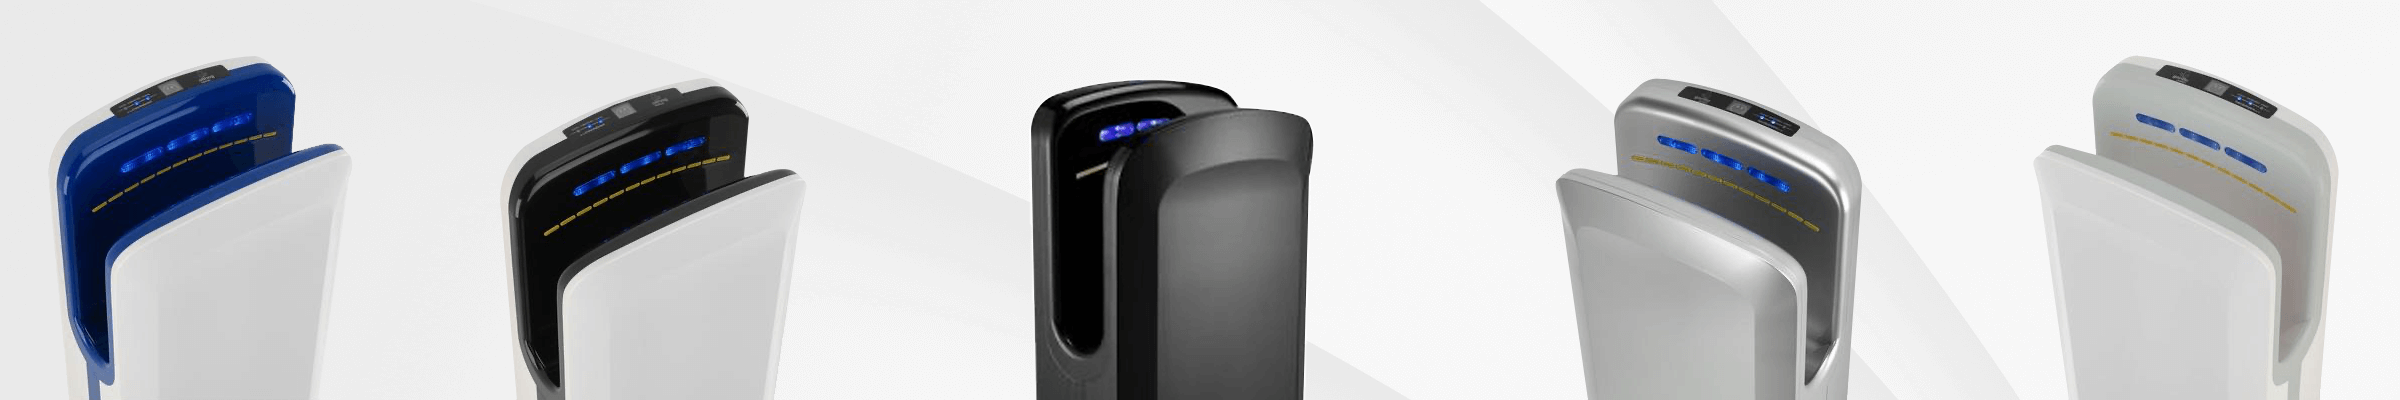 Blade Hand Dryers - The Most Powerful & Modern On The Market